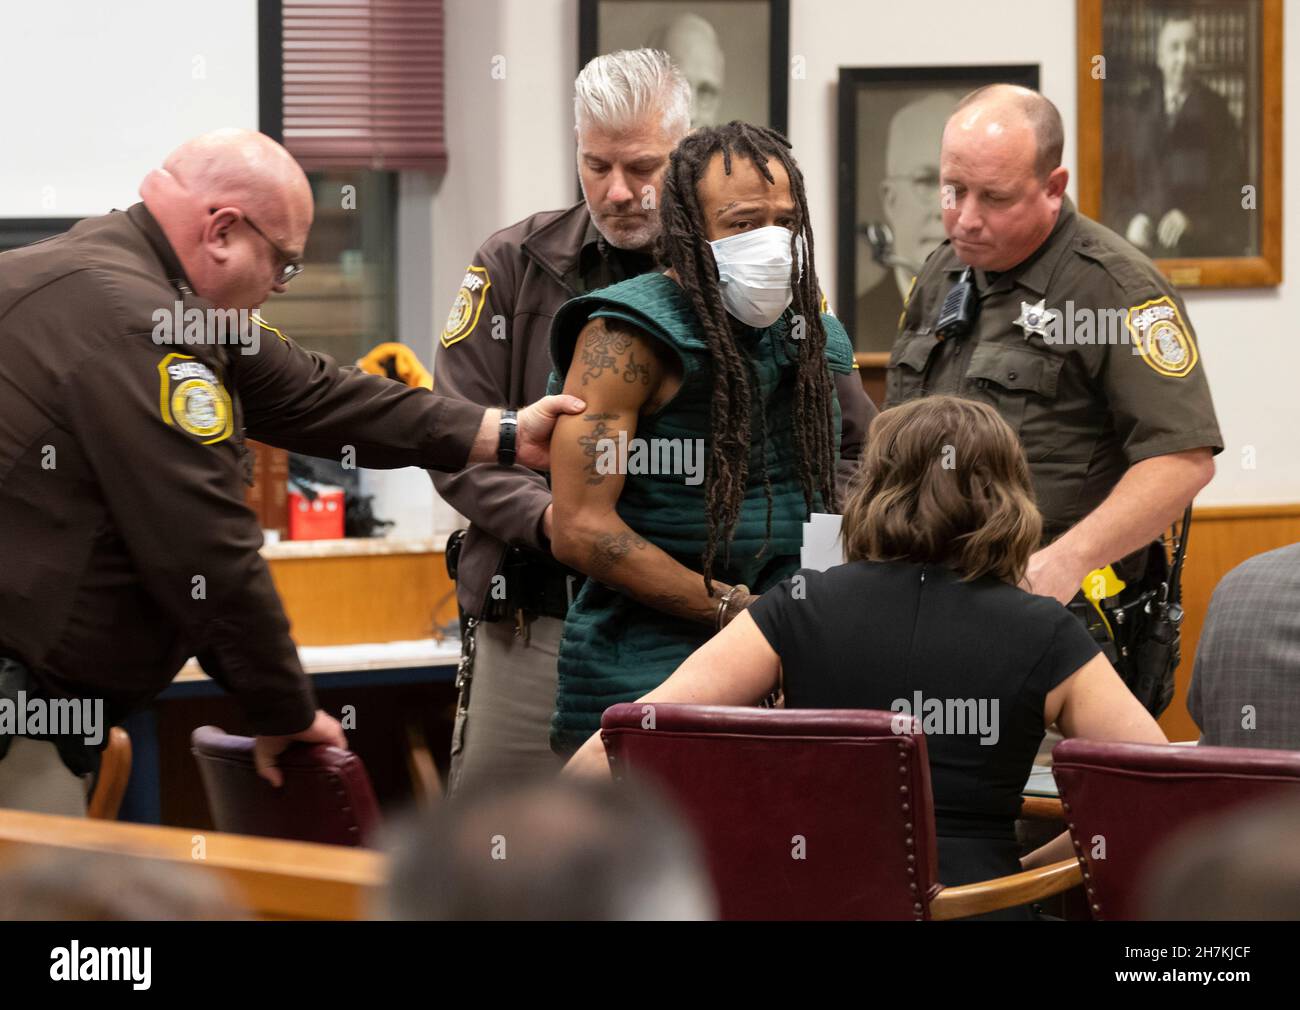 Darrell Brooks, charged with killing five people and injuring nearly 50 after plowing through a Christmas parade with his sport utility vehicle on November 21, appears in Waukesha County Court in Waukesha, Wisconsin, U.S.  November 23, 2021. Mark Hoffman/Pool via REUTERS Stock Photo